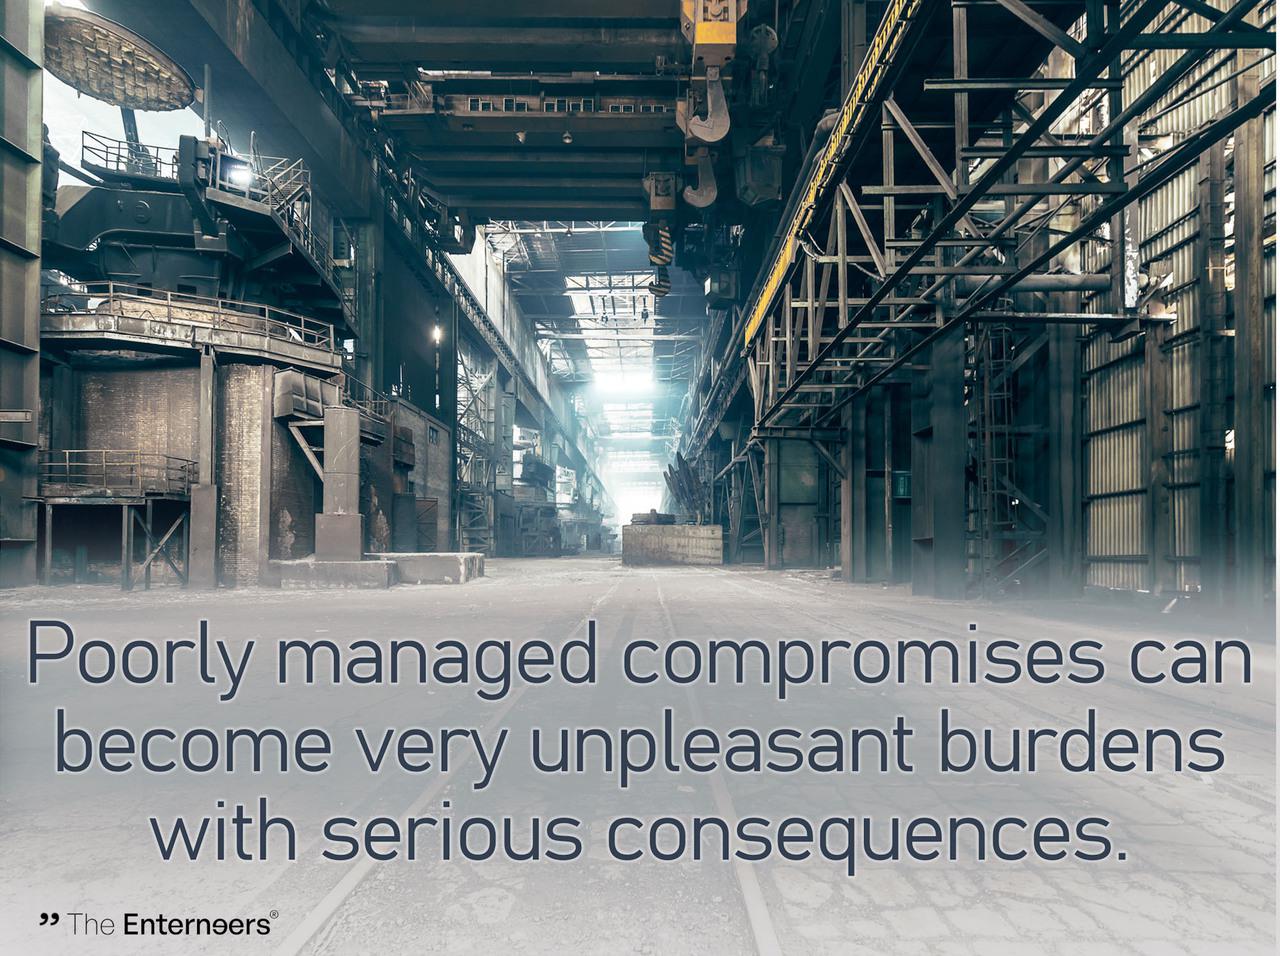 The consequences of poorly managed compromises